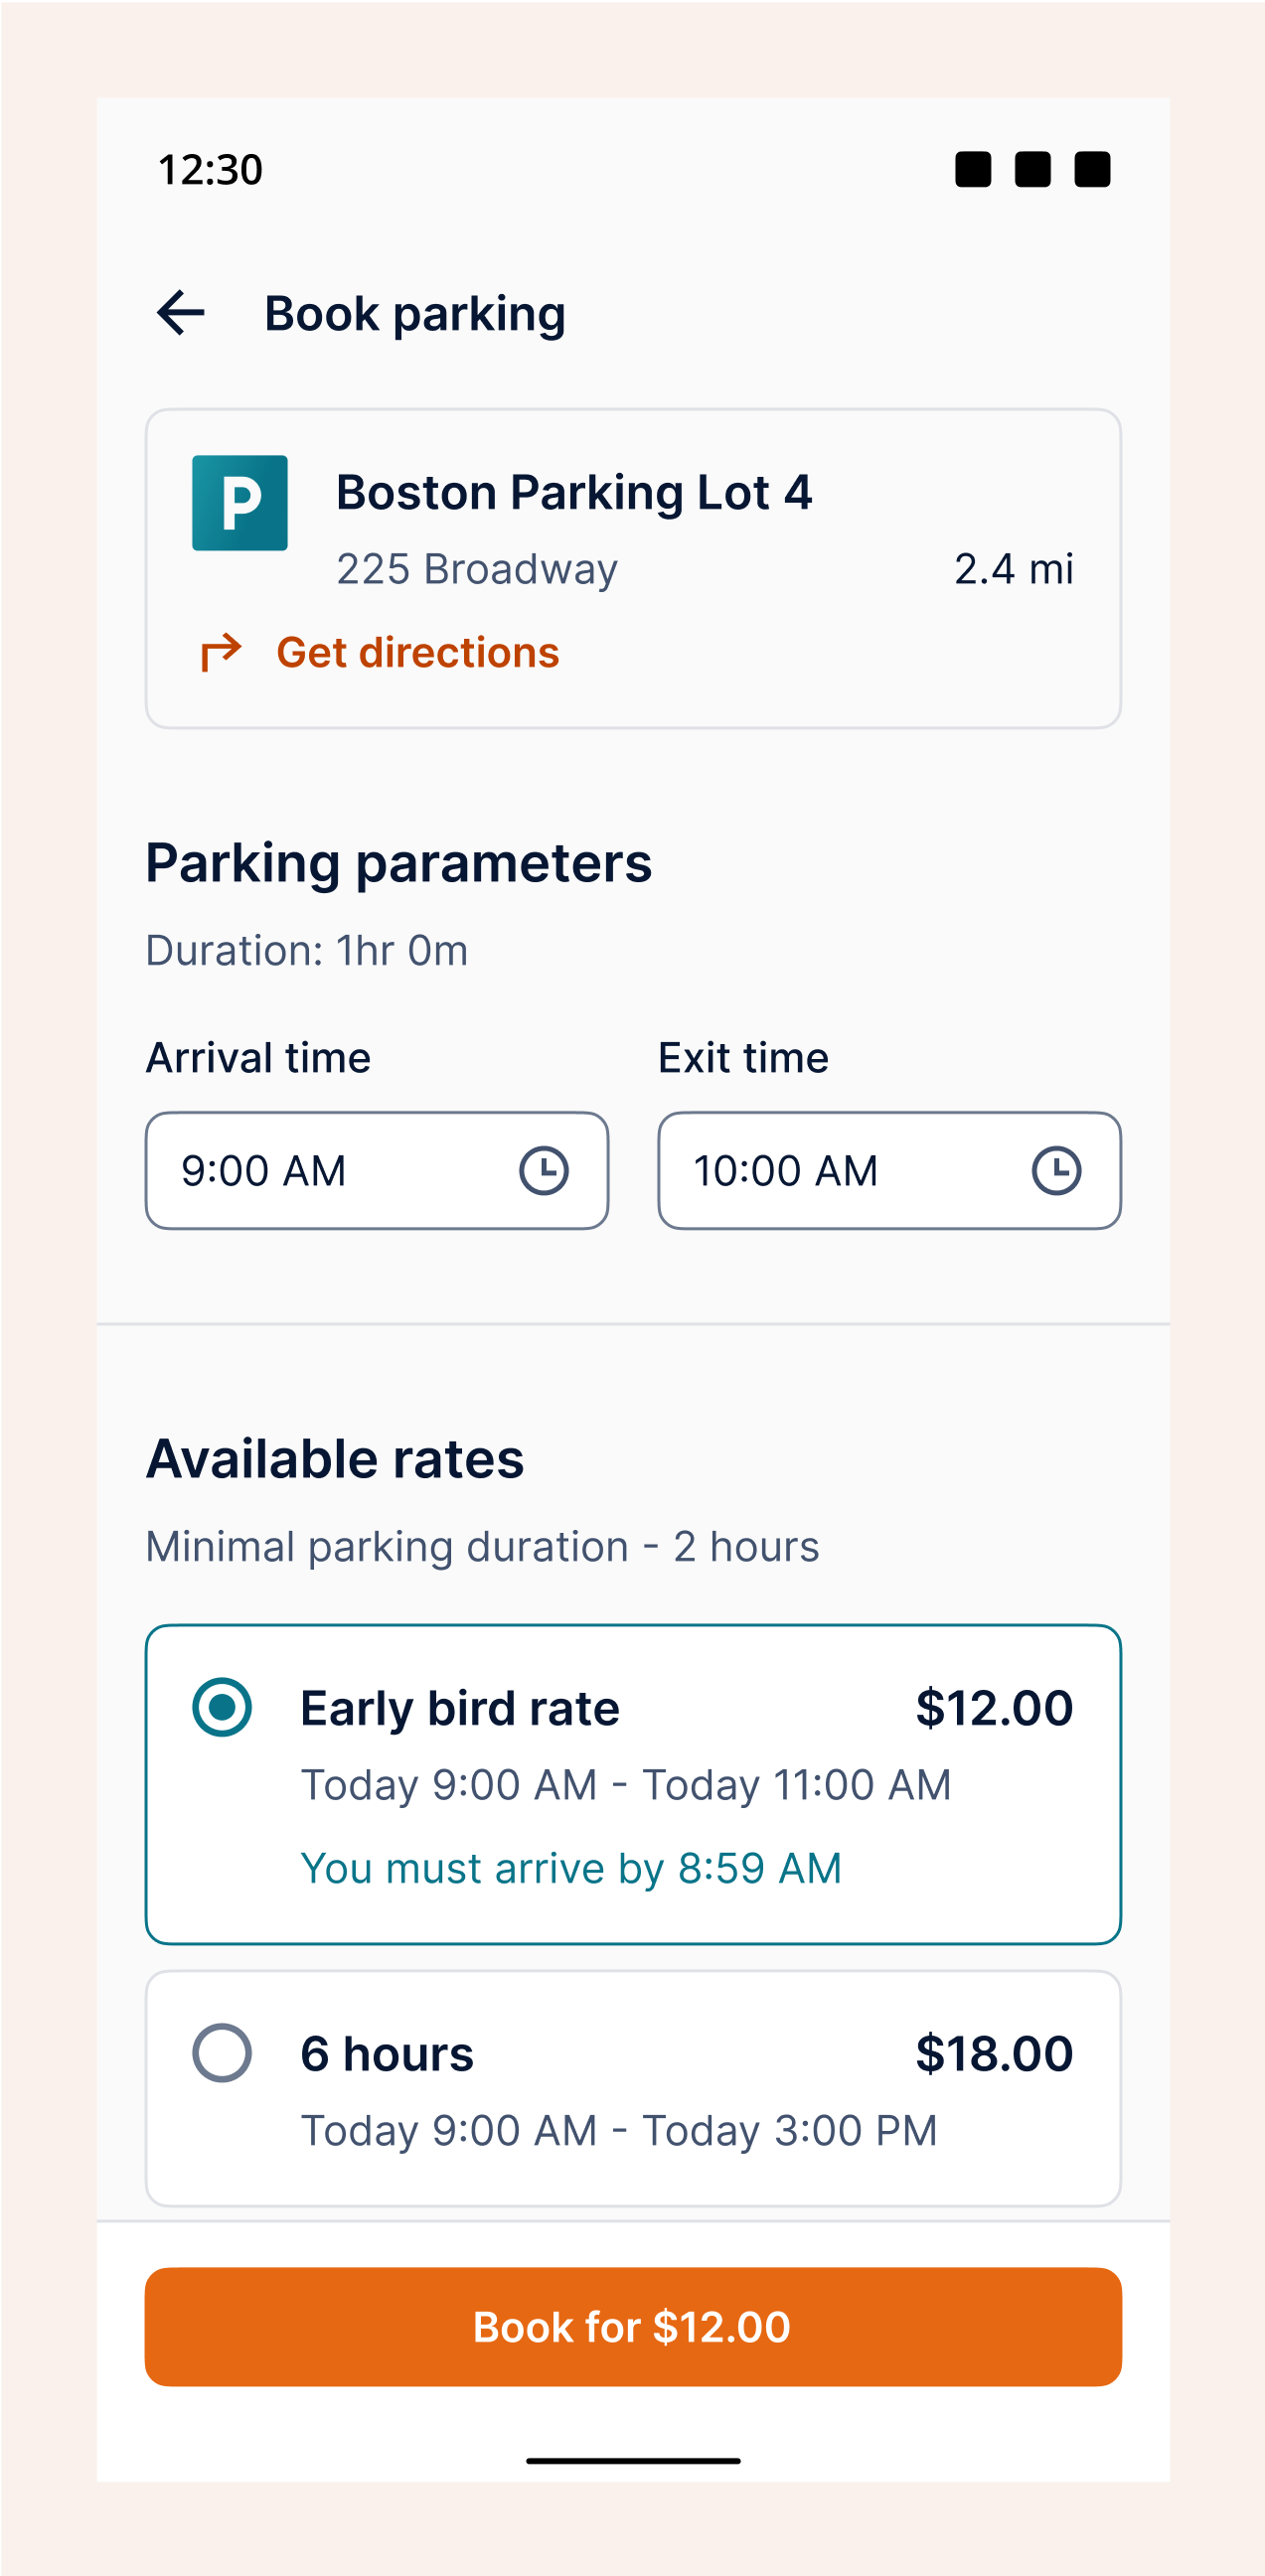 Mobile screen of scheduling a parking reservation with Car IQ.